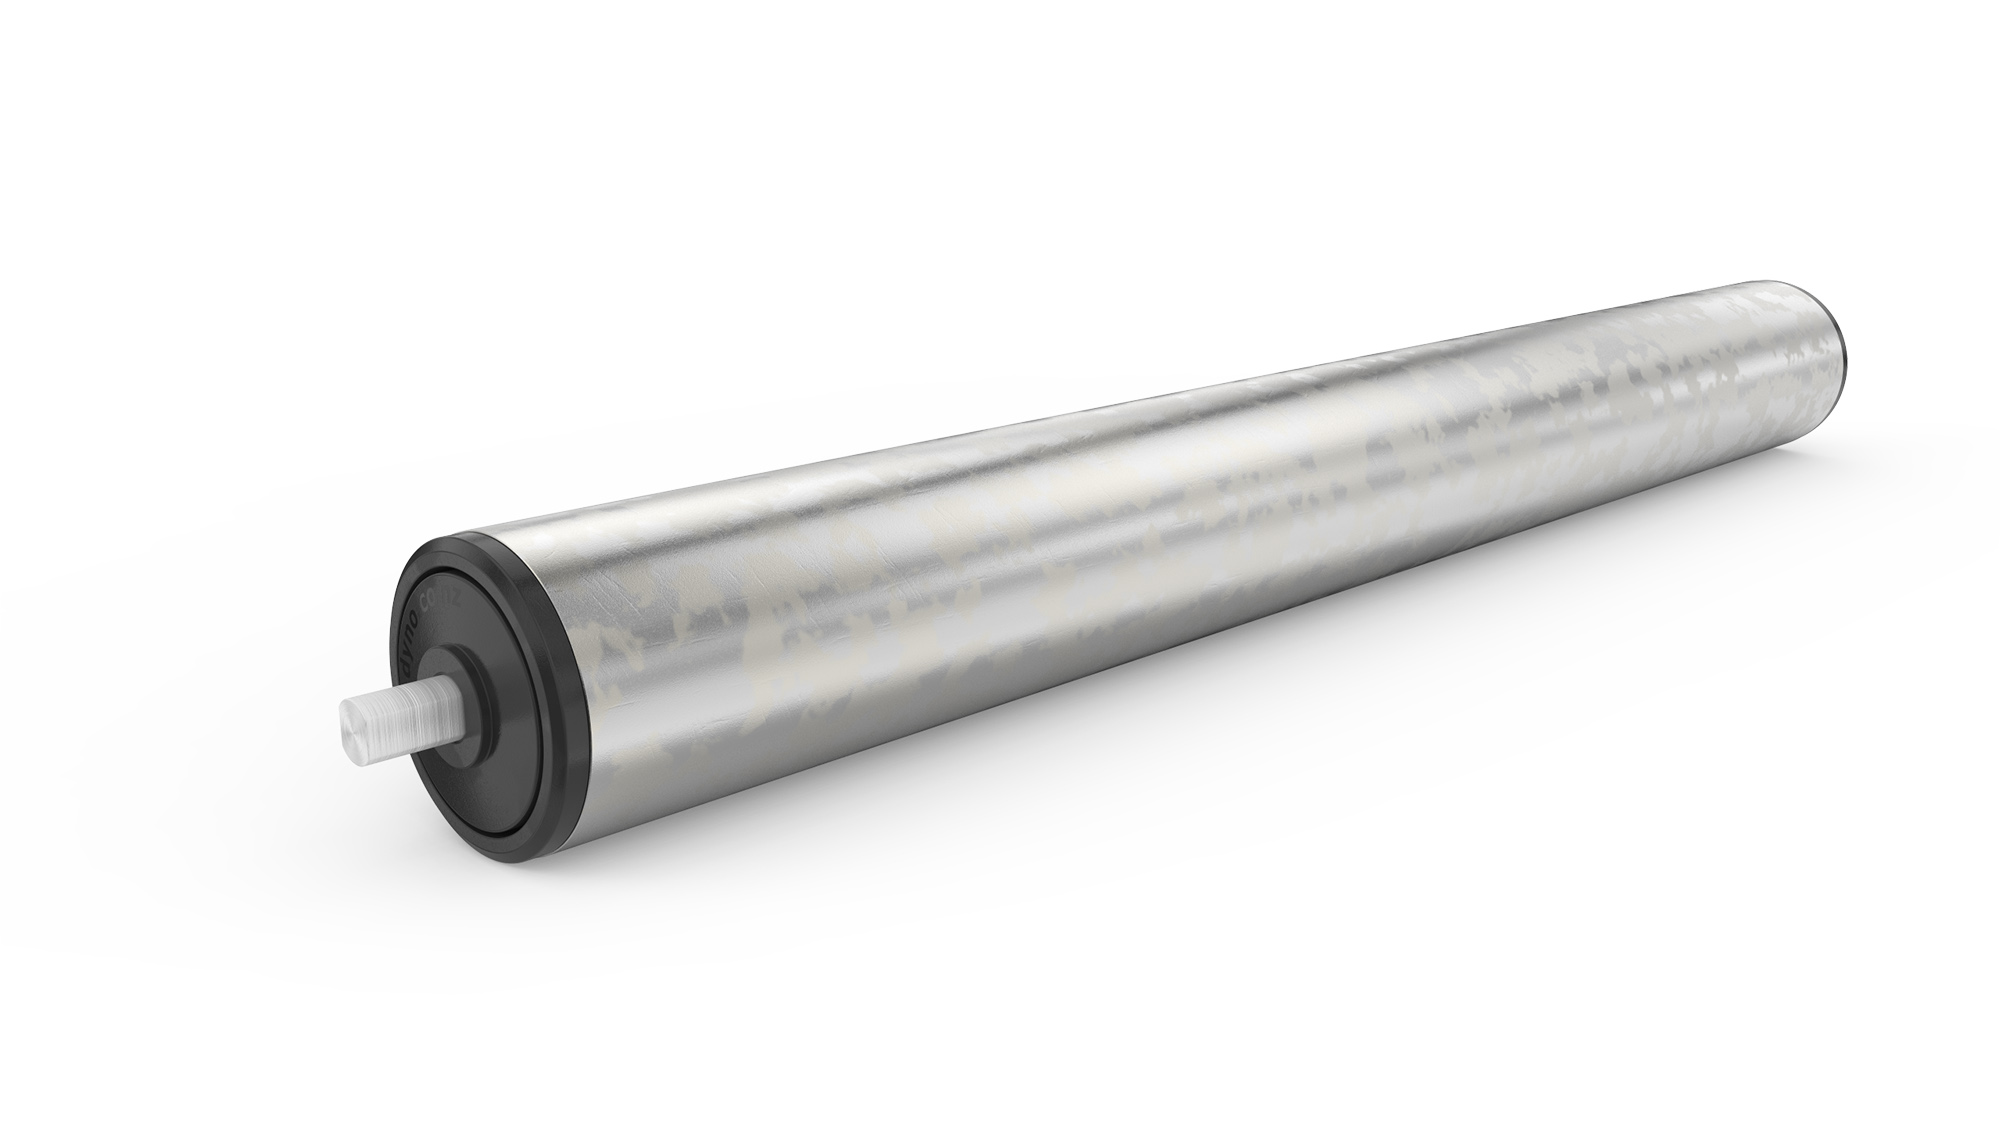 507 Galvanized Roller | Dyno Conveyors - Roller, Belt, Chain and ...